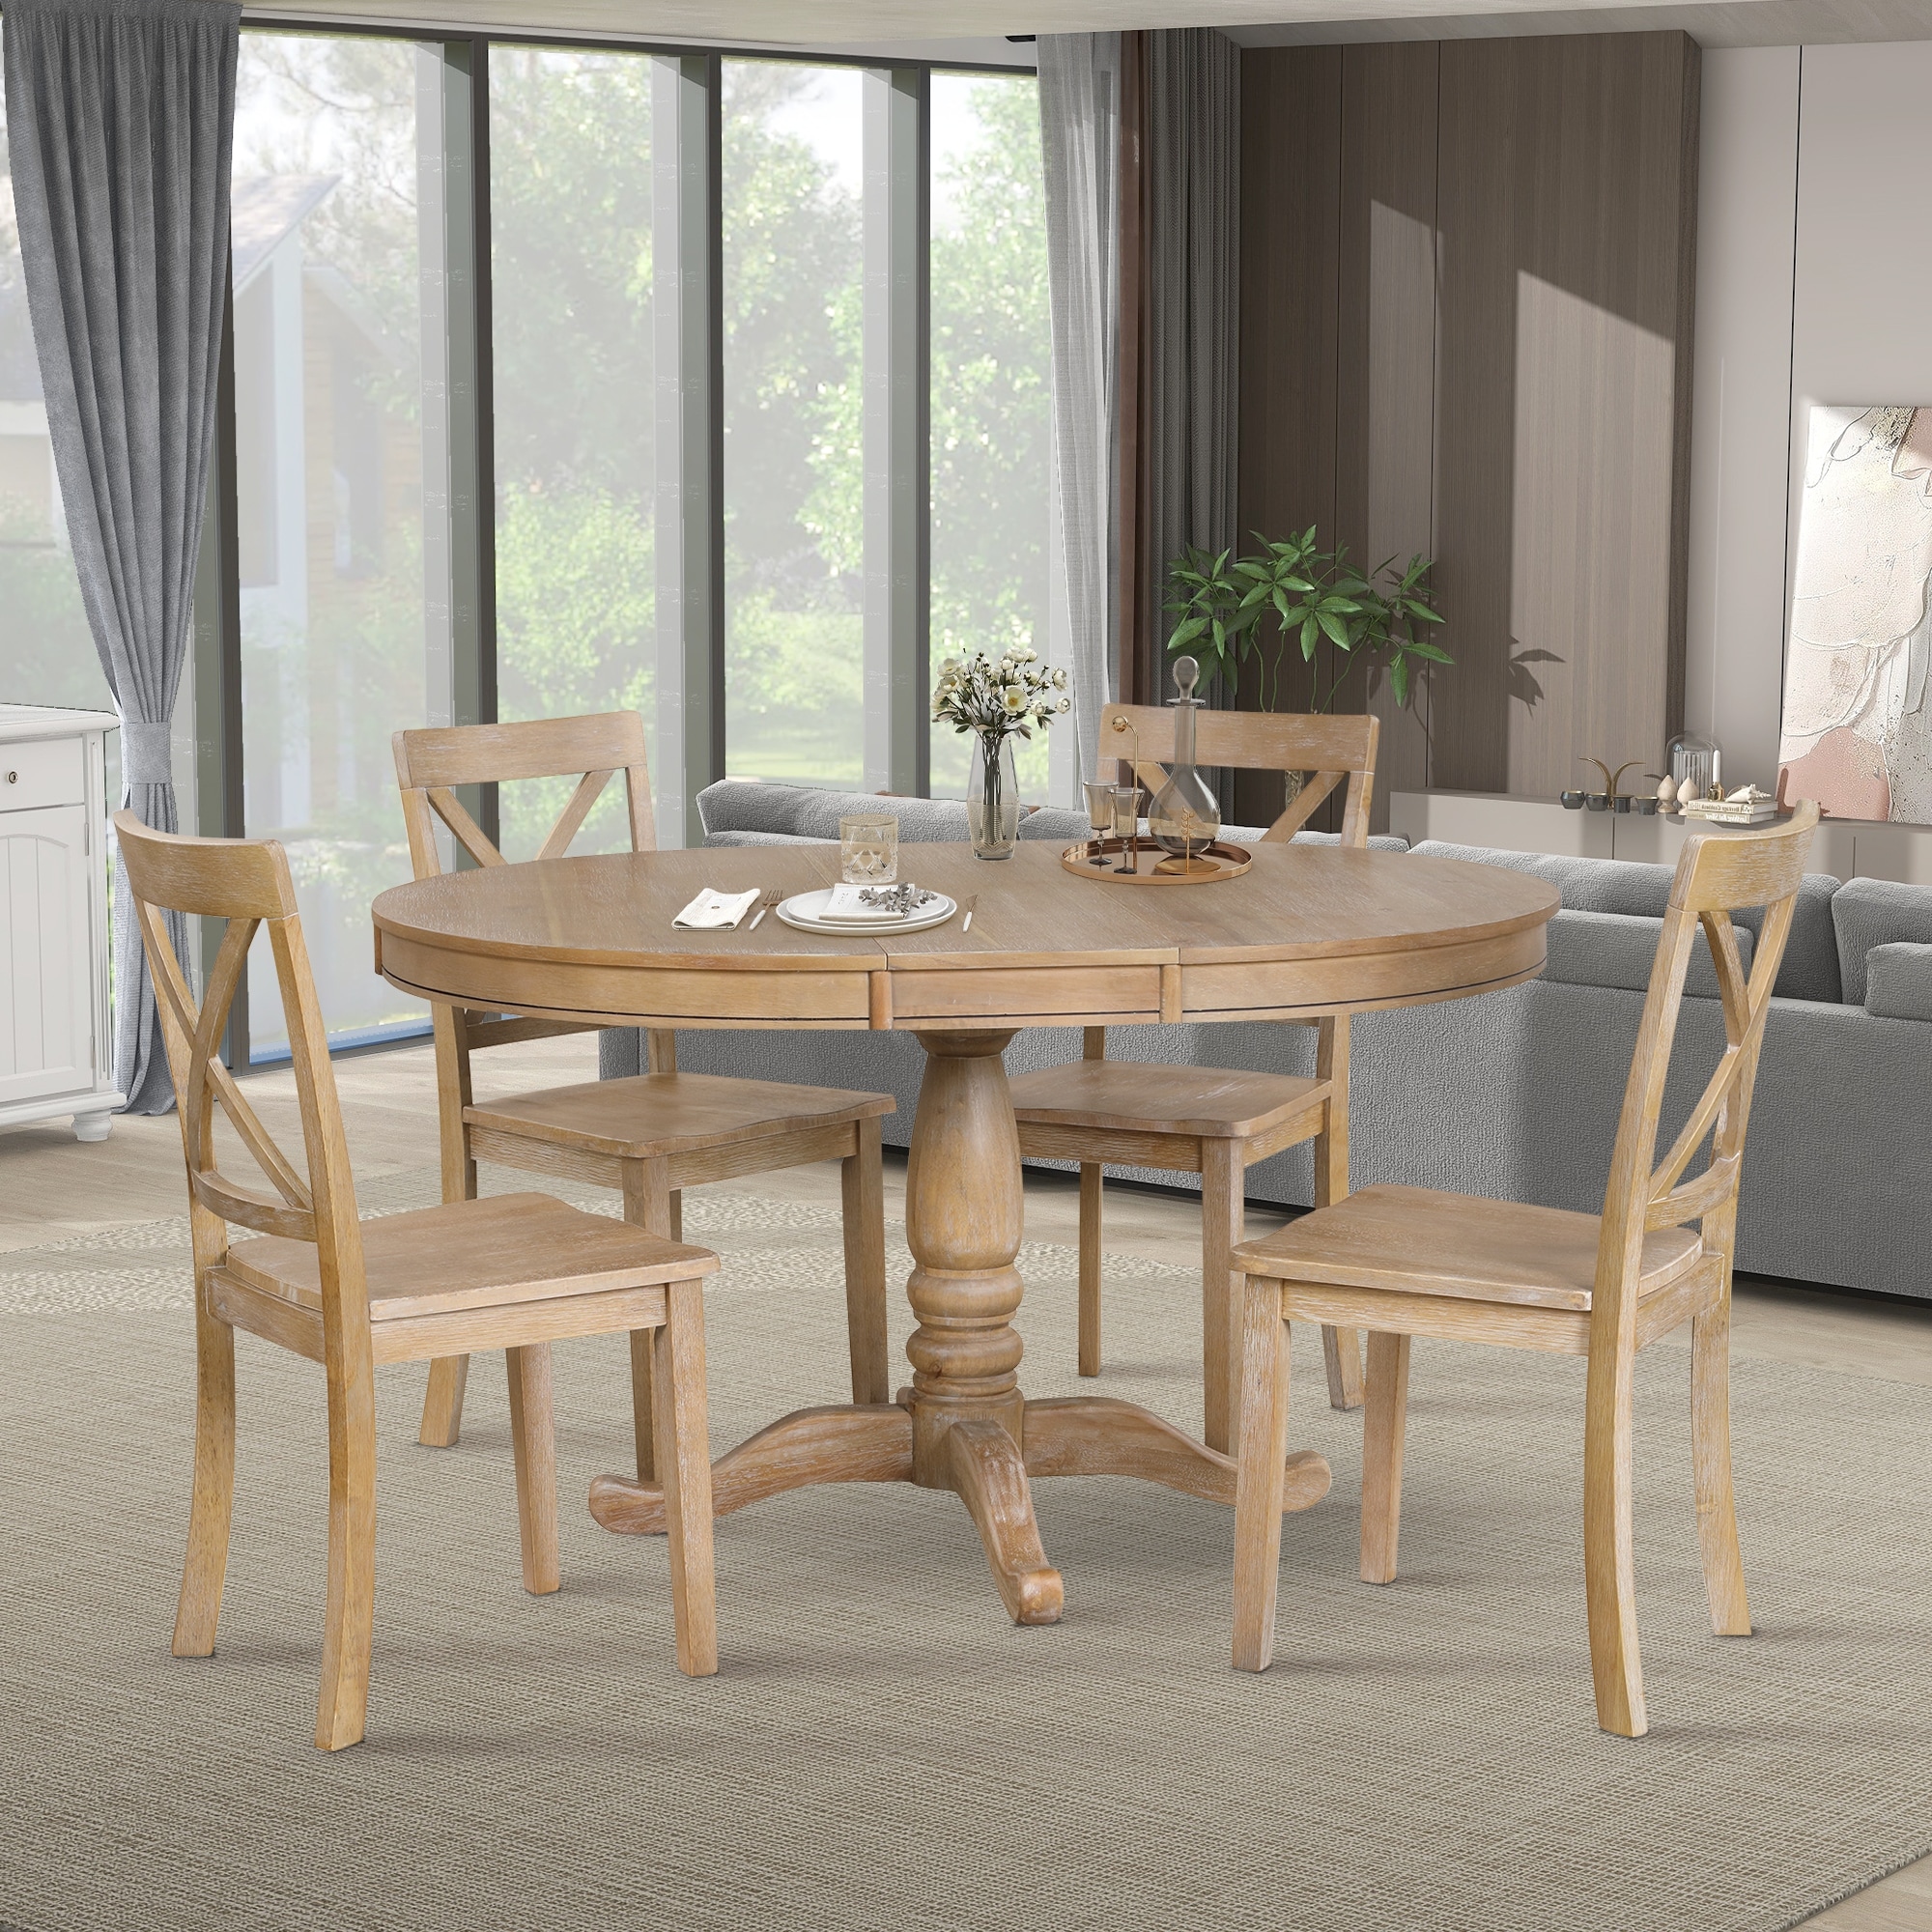 https://ak1.ostkcdn.com/images/products/is/images/direct/65448b917672961af2ade88b9ad8b4e04654215c/Neoclassical-Style-Dining-Table-Set-for-4%2CRound-Table-and-4-Kitchen-Room-Chairs%2C5-Piece-Kitchen-Table-Set-for-Dining-Room.jpg